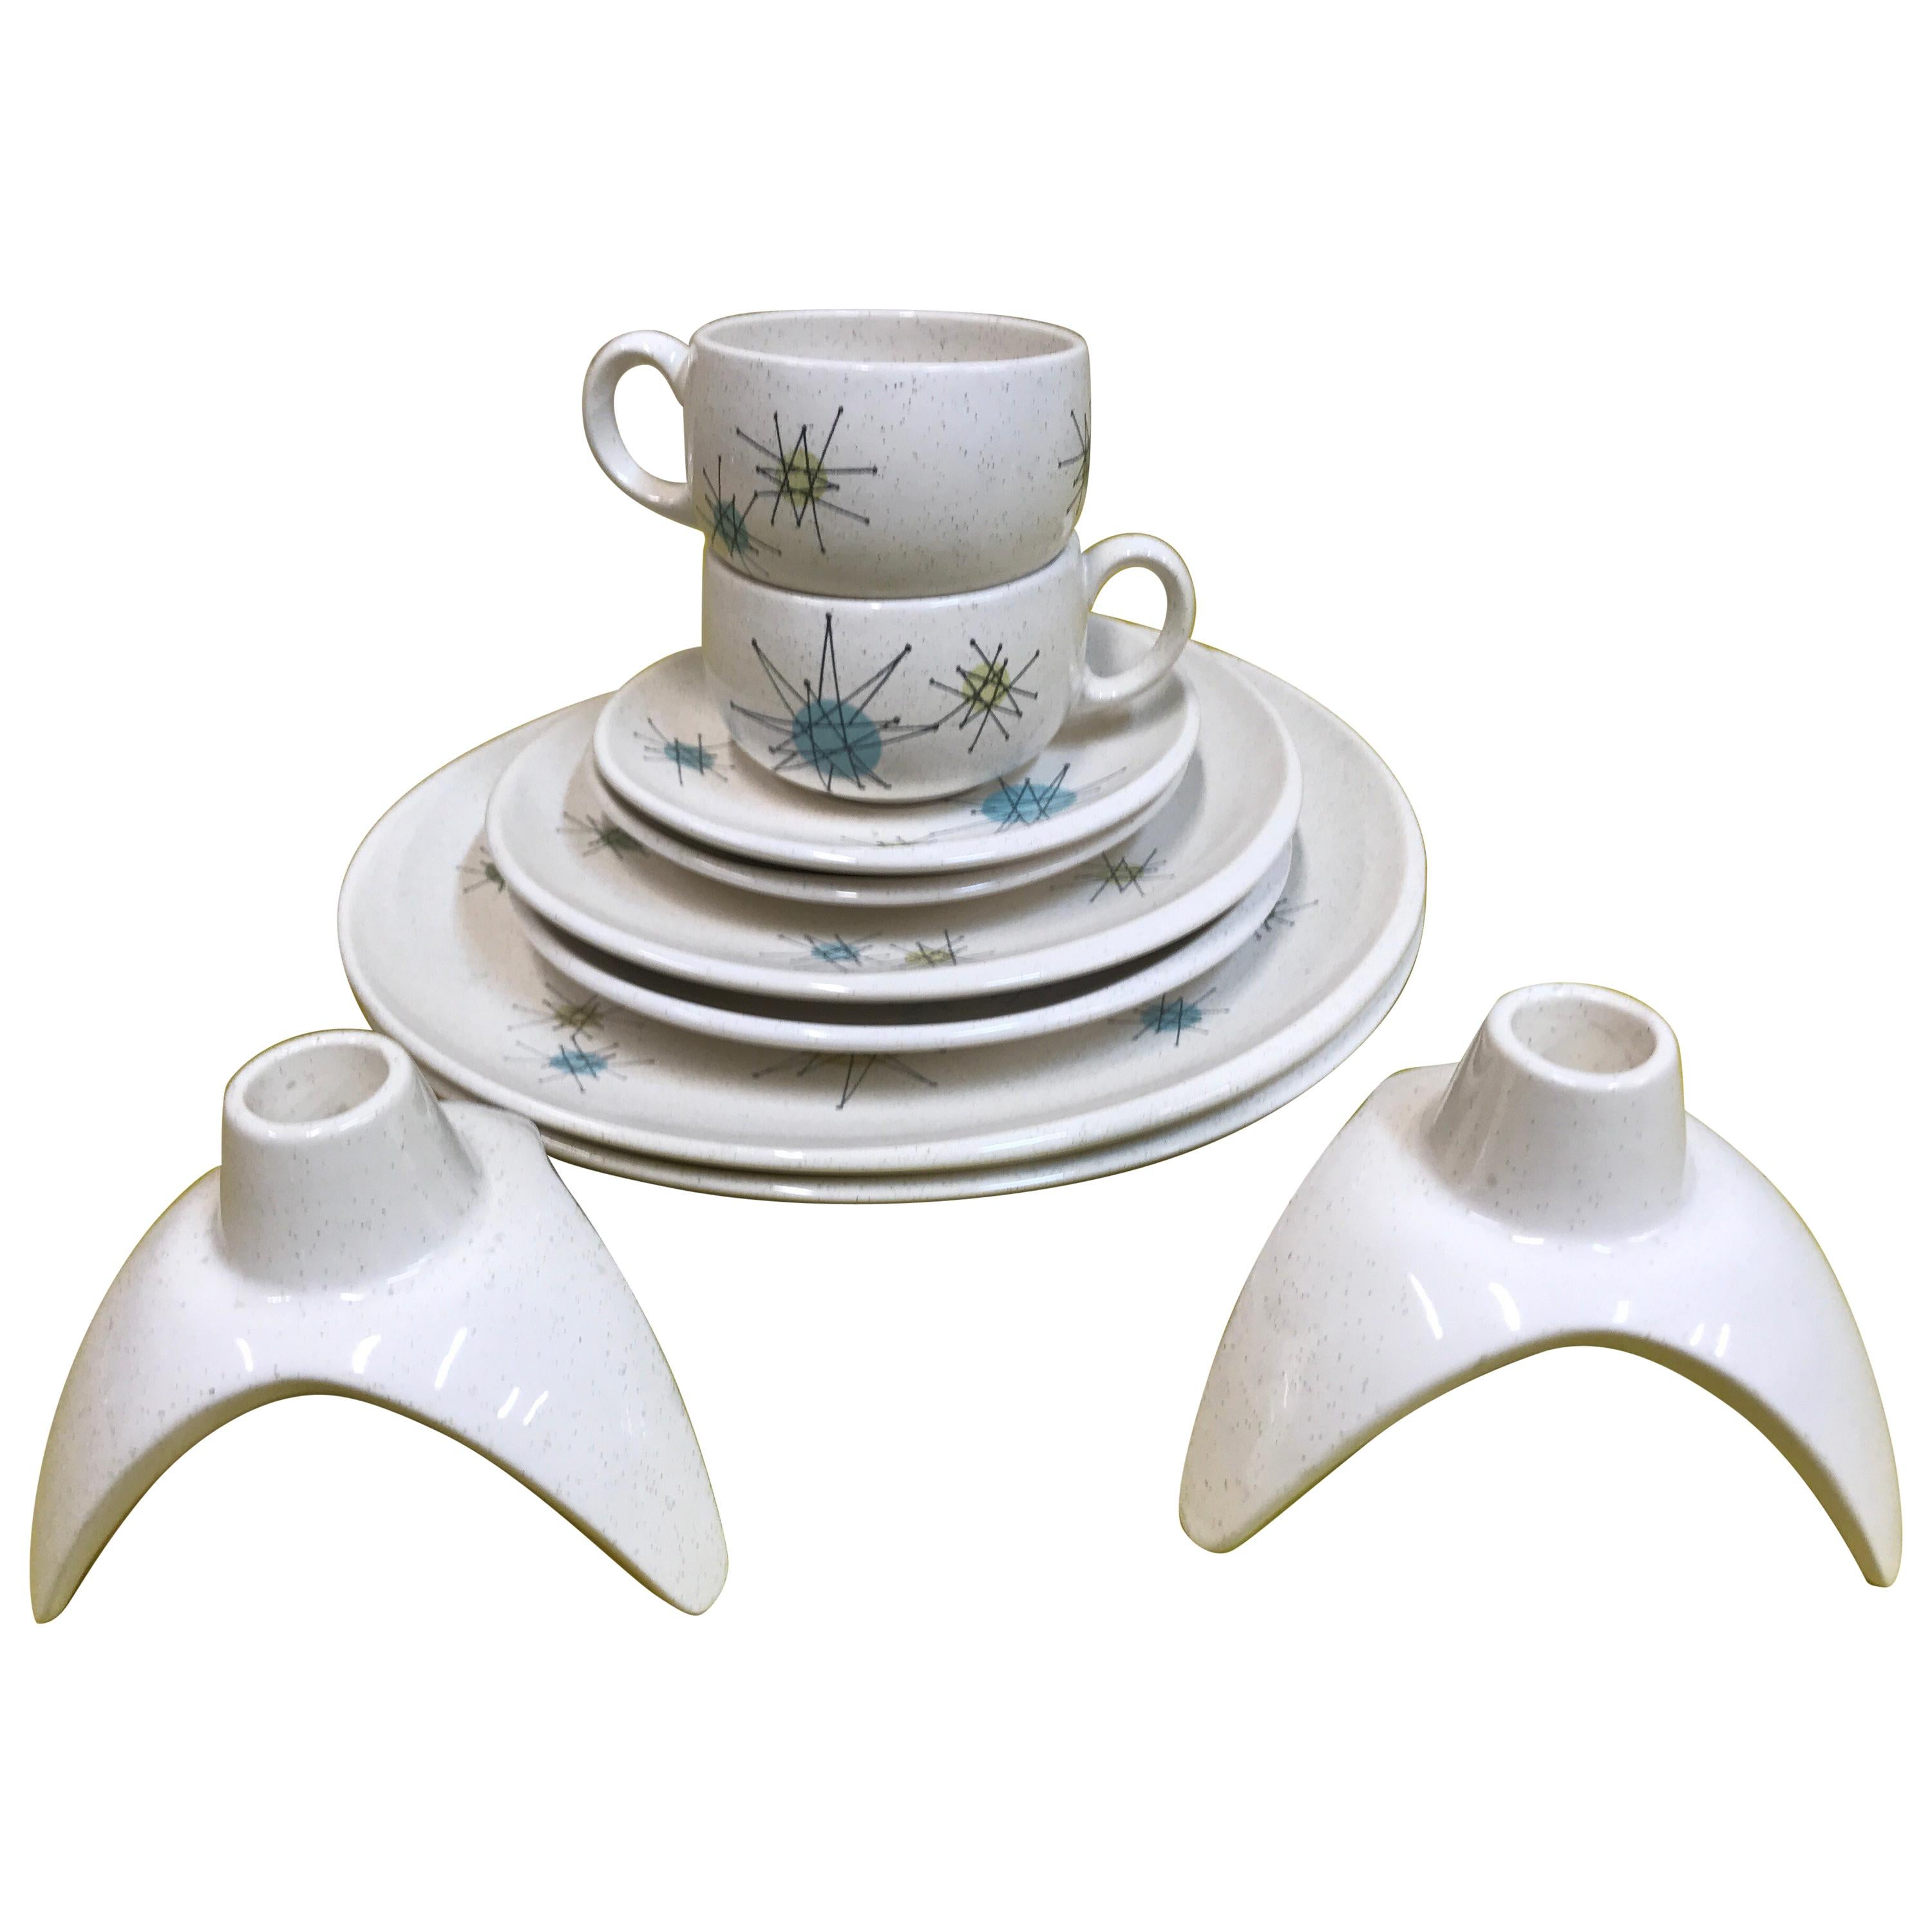 Midcentury Set of 5 Franciscan Starburst Dinnerware with Matching Candleholders